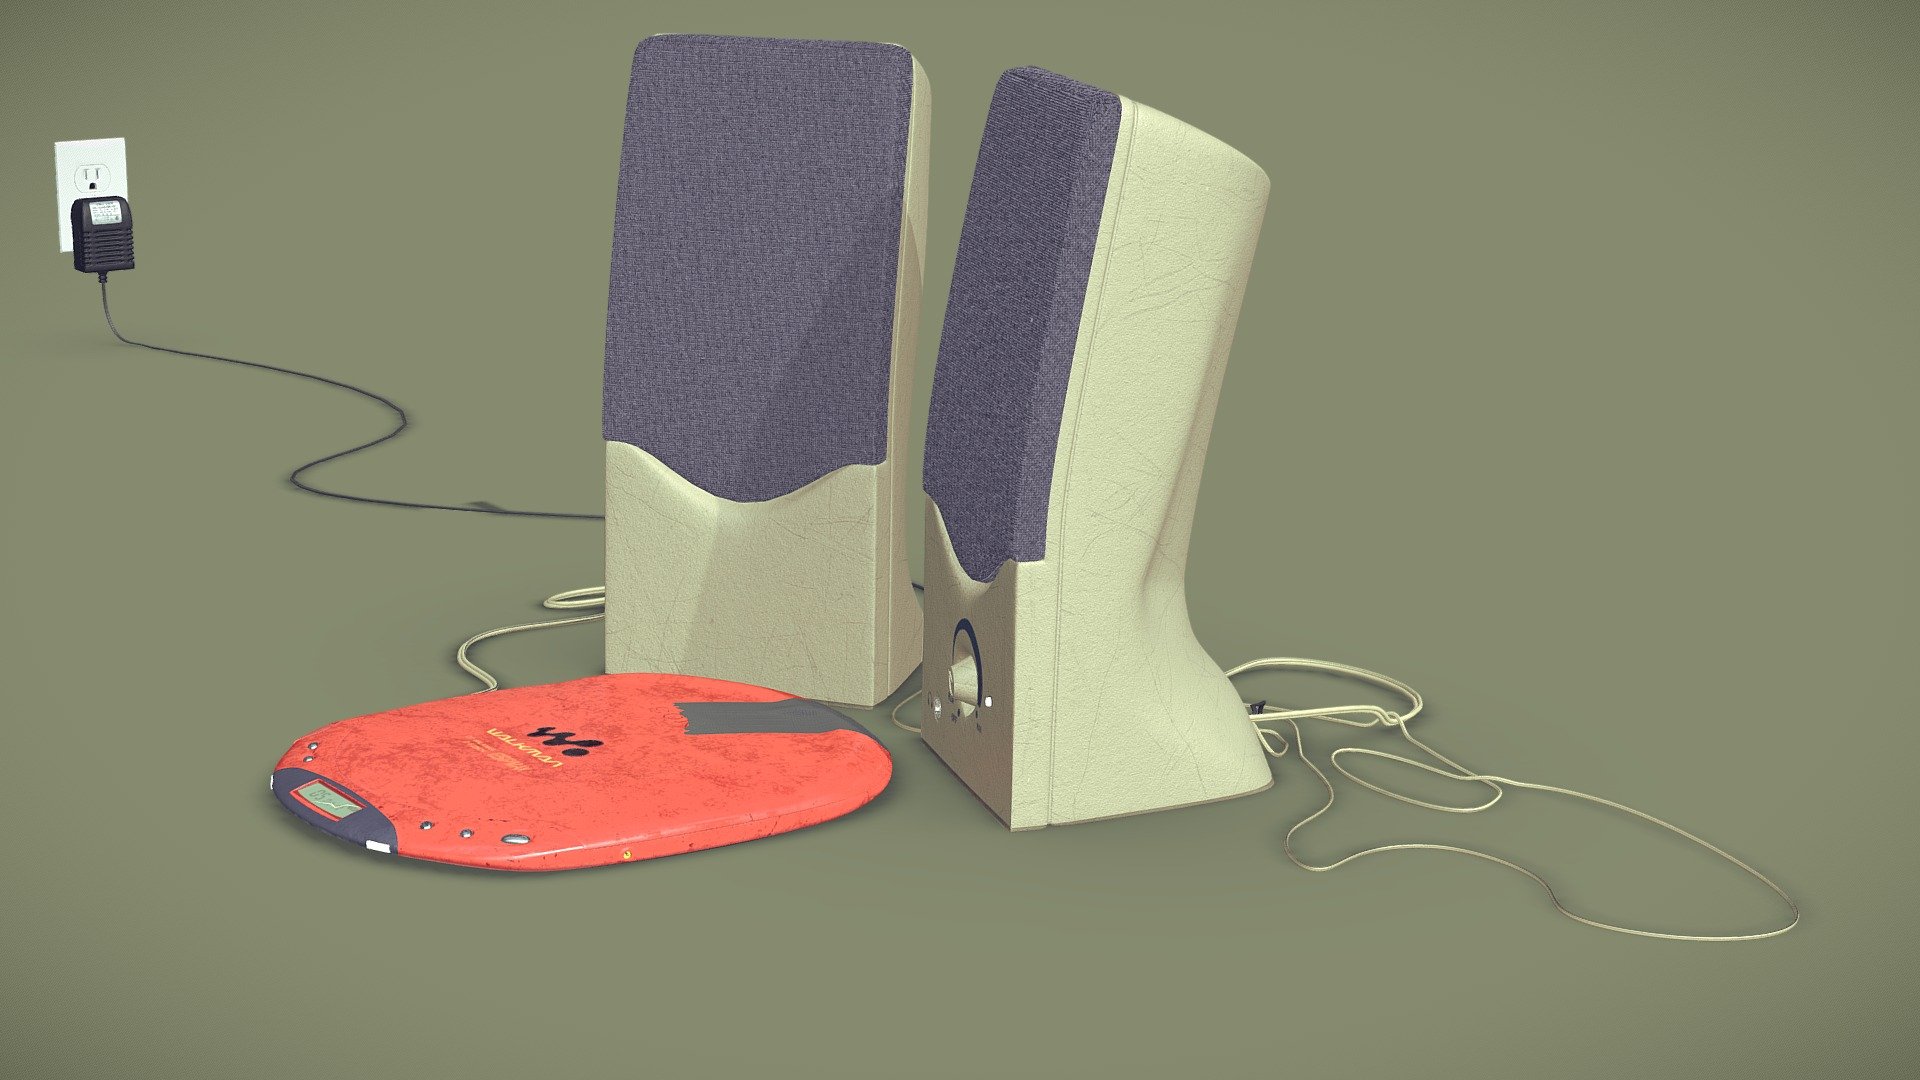 This is a quick and easy model of a Sony Walkman D-E220 ESPMAX that I made for an art piece.

It's not at all perfect, it was made in a few hour for a quick render 3d model